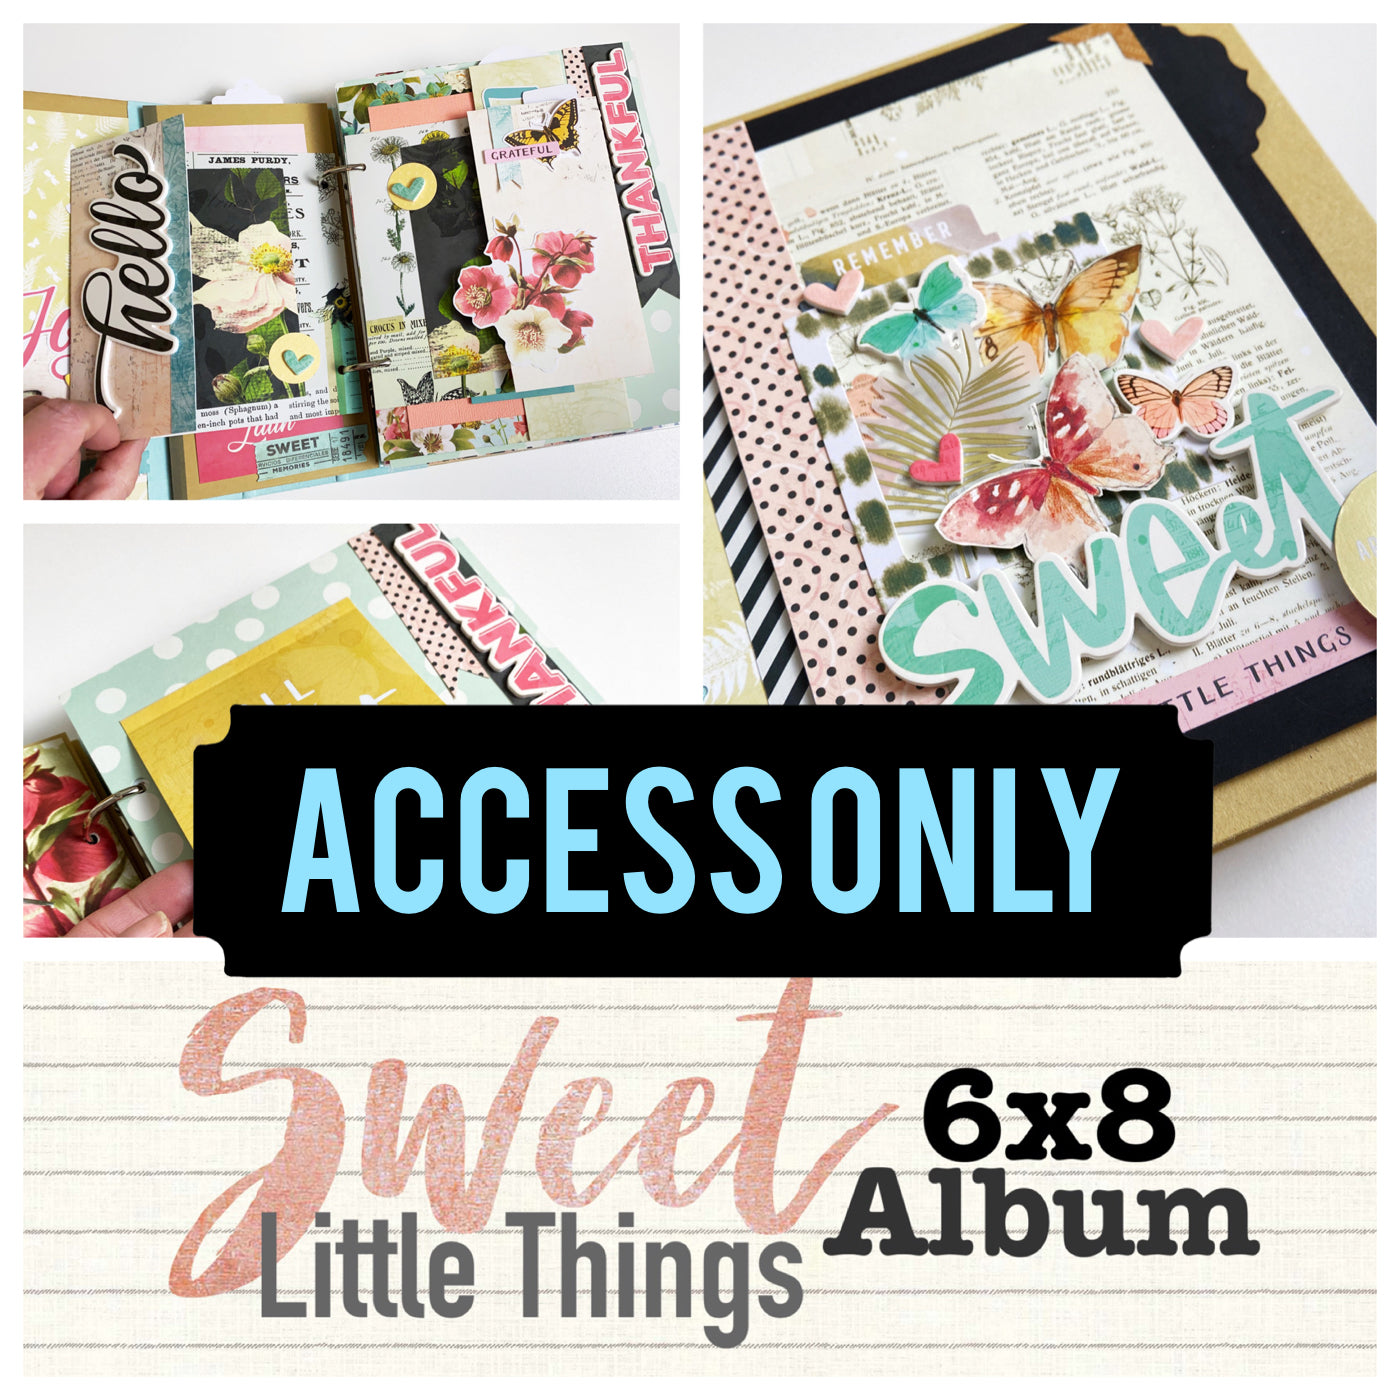 Sweet Little Things 6x8 Album- ACCESS ONLY- NO KIT